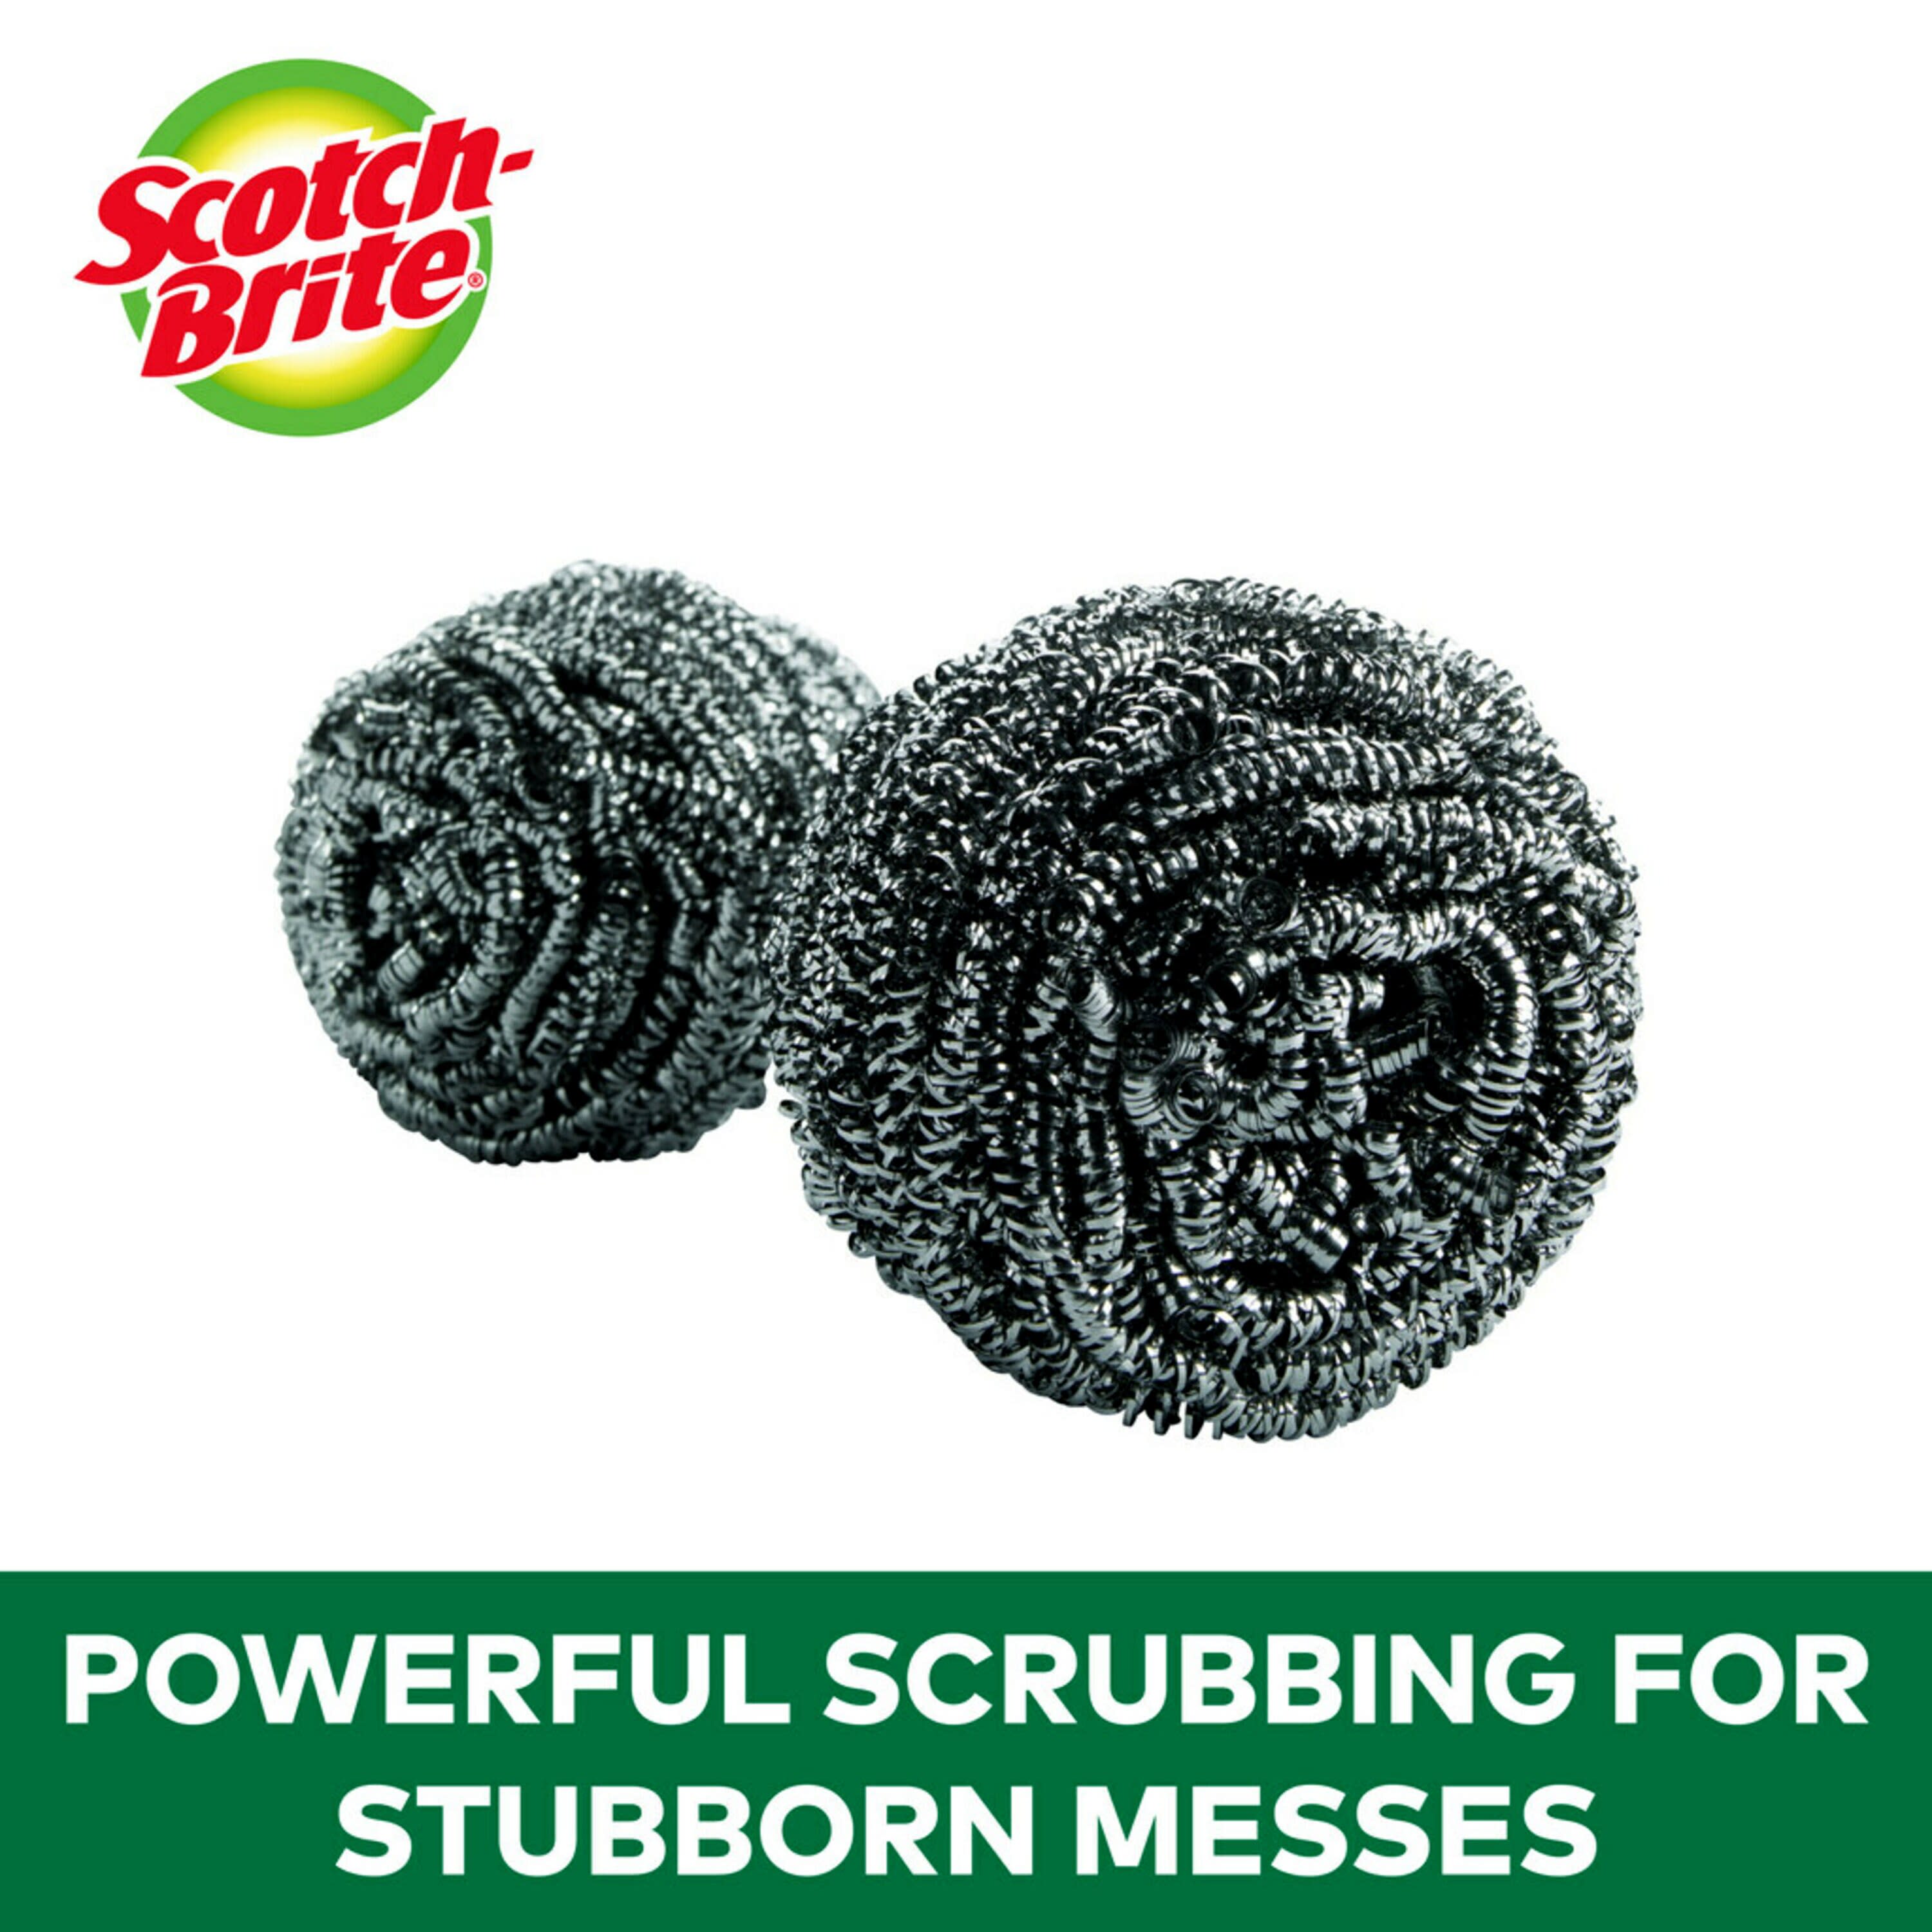 Scotch-Brite Stainless Steel Scrubbers, 3 Scrubbers - image 3 of 9